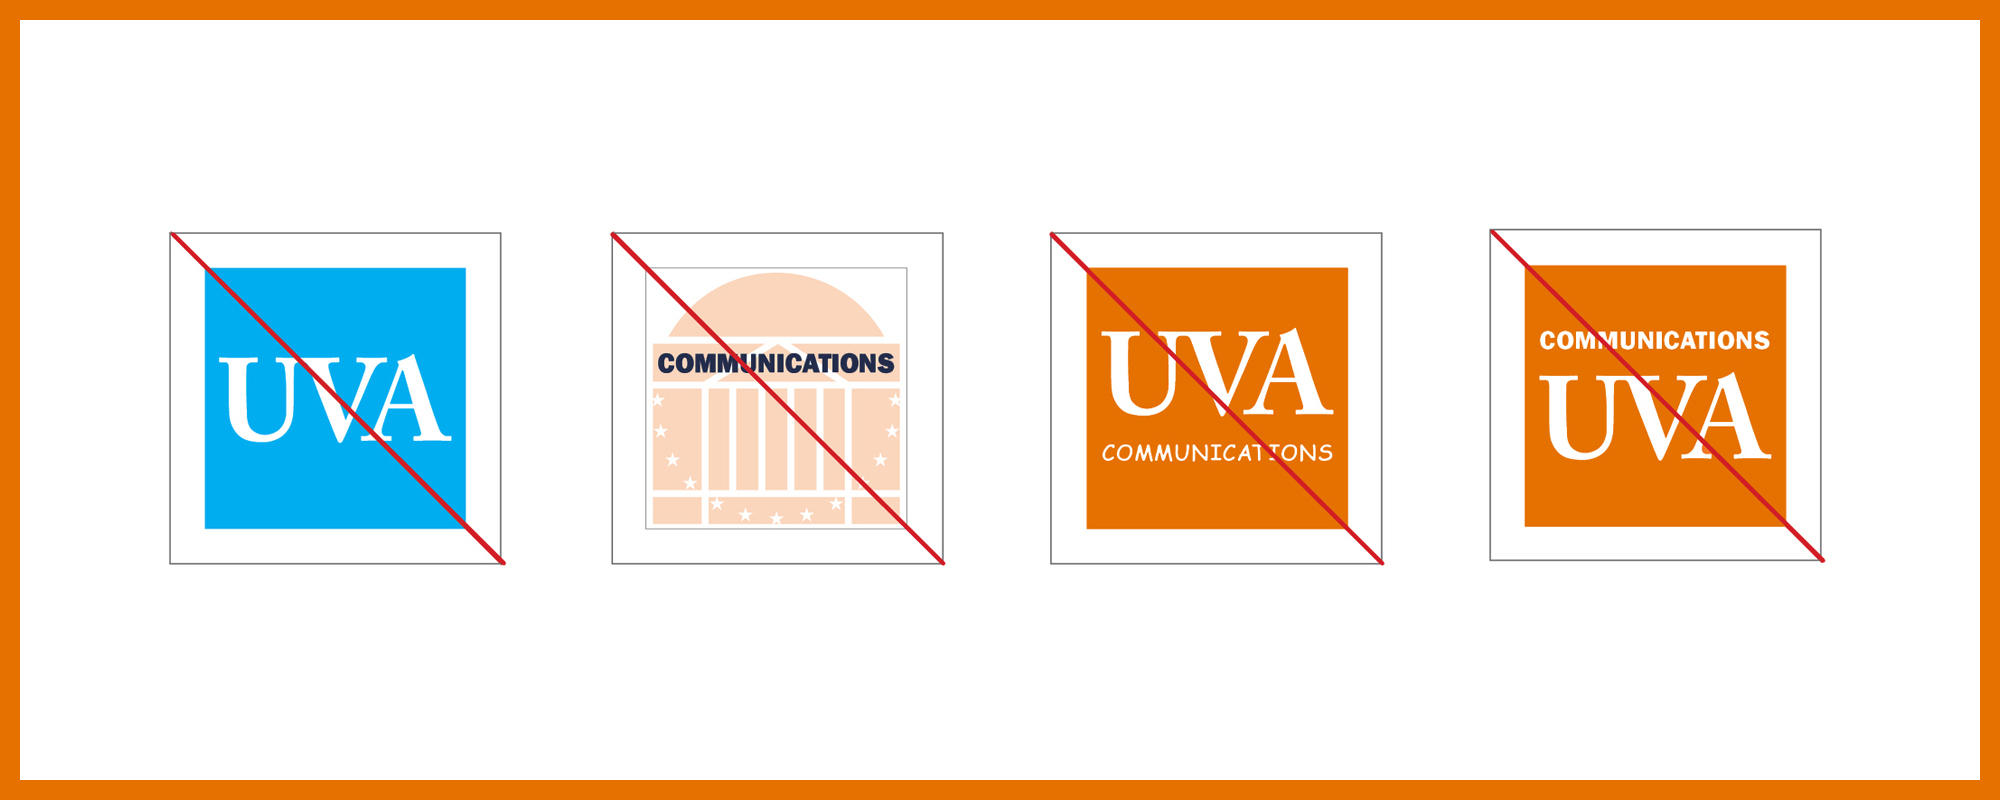 Examples of incorrect social media avatars: UVA logo on the wrong colored background, writing over the rotunda or other logo elements, incorrect font usage, or moving elements of the logo around. 